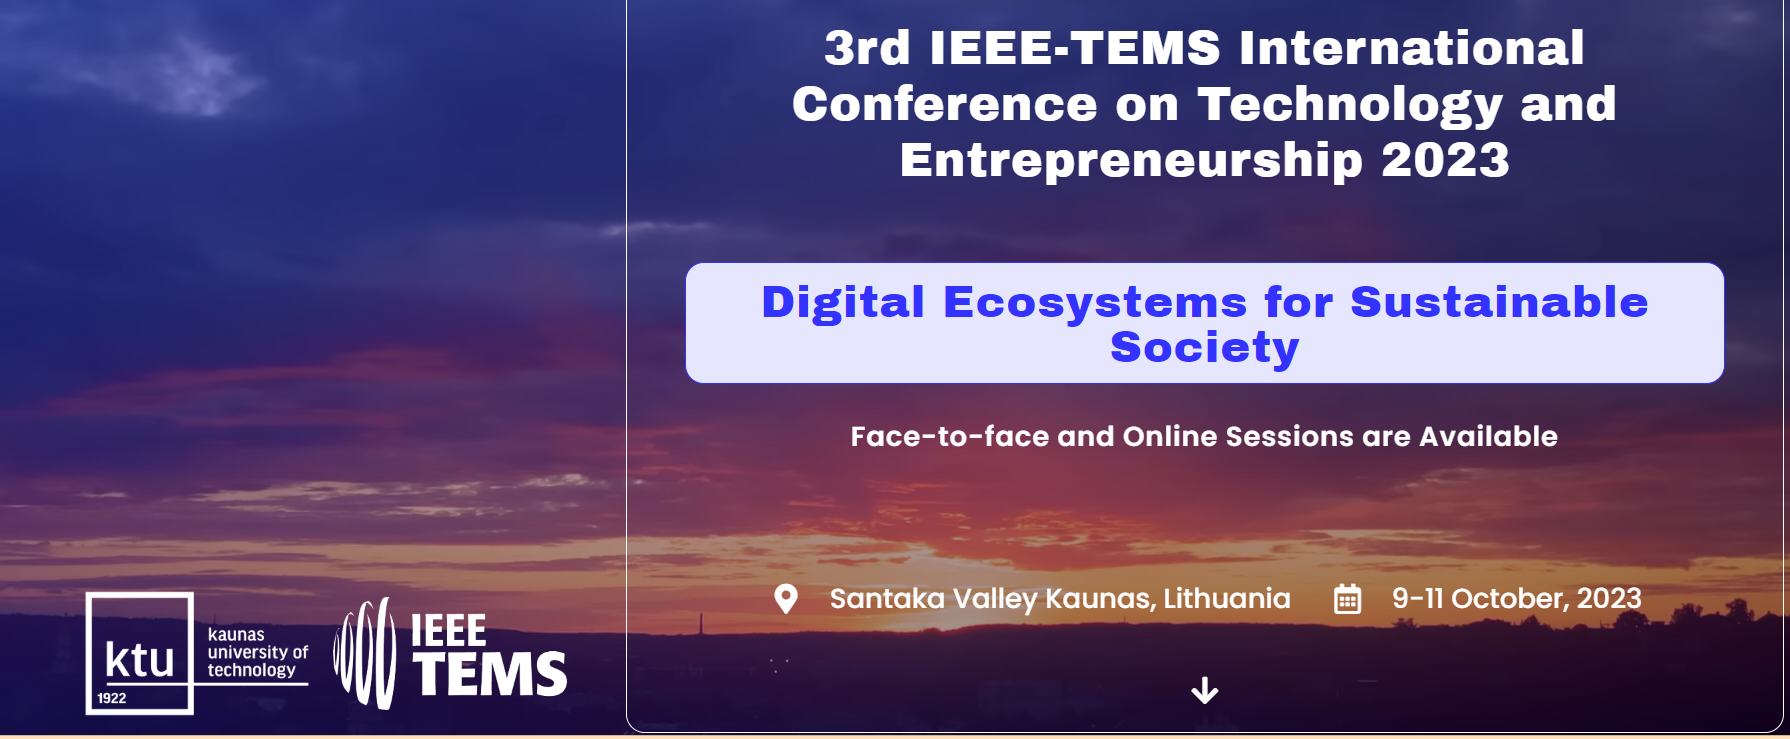 Call for Papers: 3rd IEEE-TEMS ICTE 2023 Digital Ecosystems for Sustainable Society 